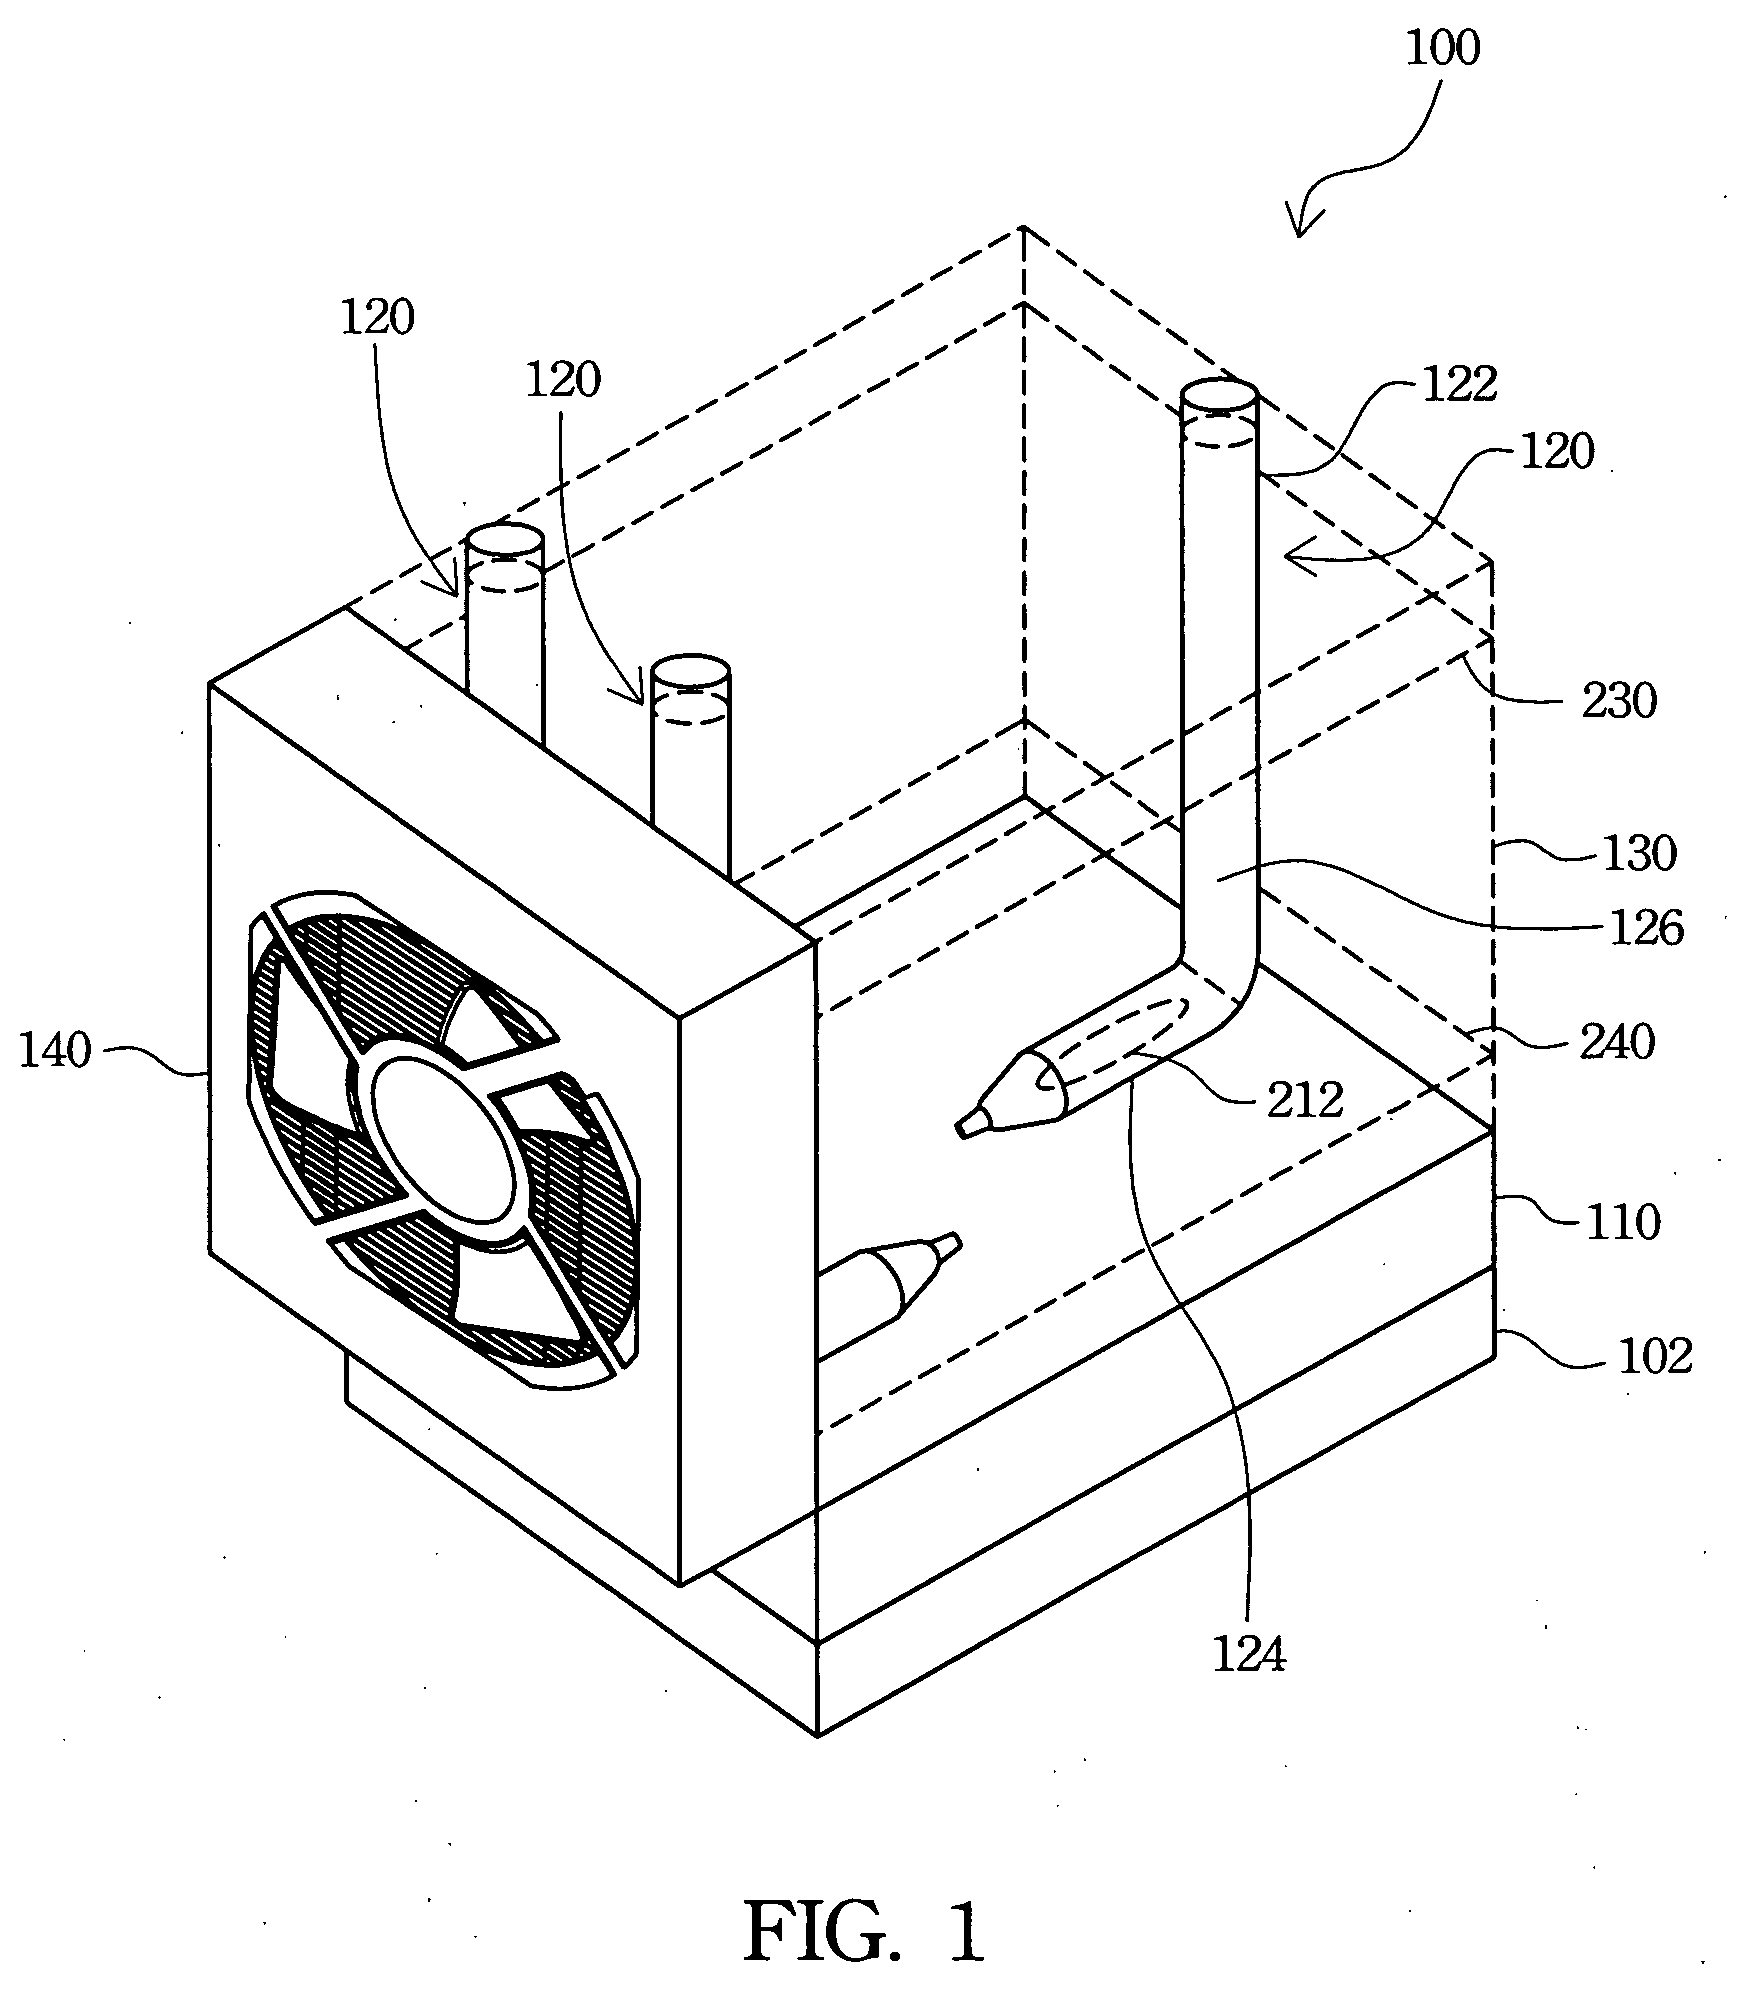 Heat dissipation device with heat pipes